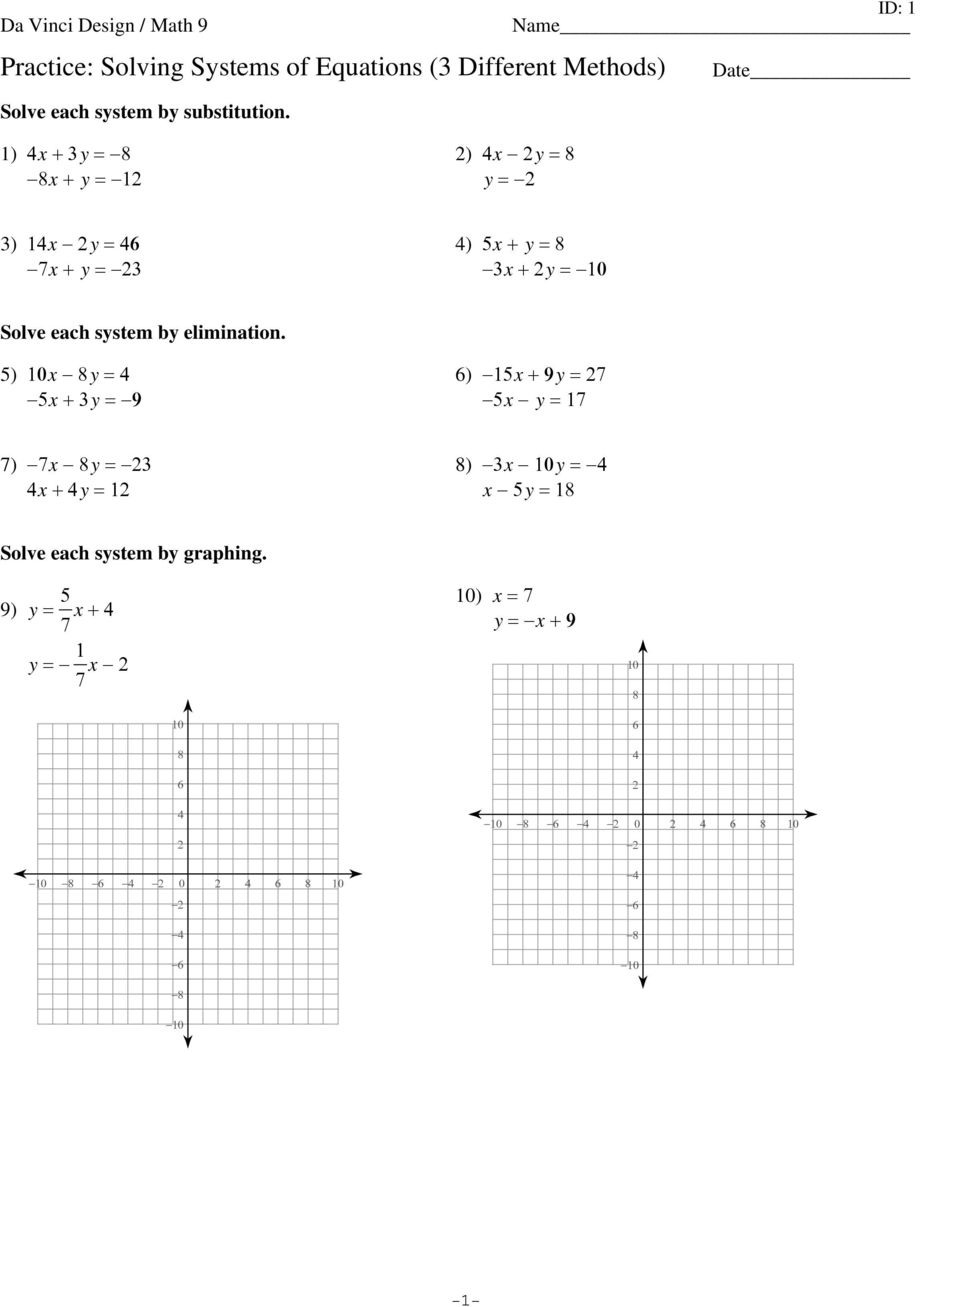 Solving Systems Of Equations By Substitution Worksheet Algebra 1 — db